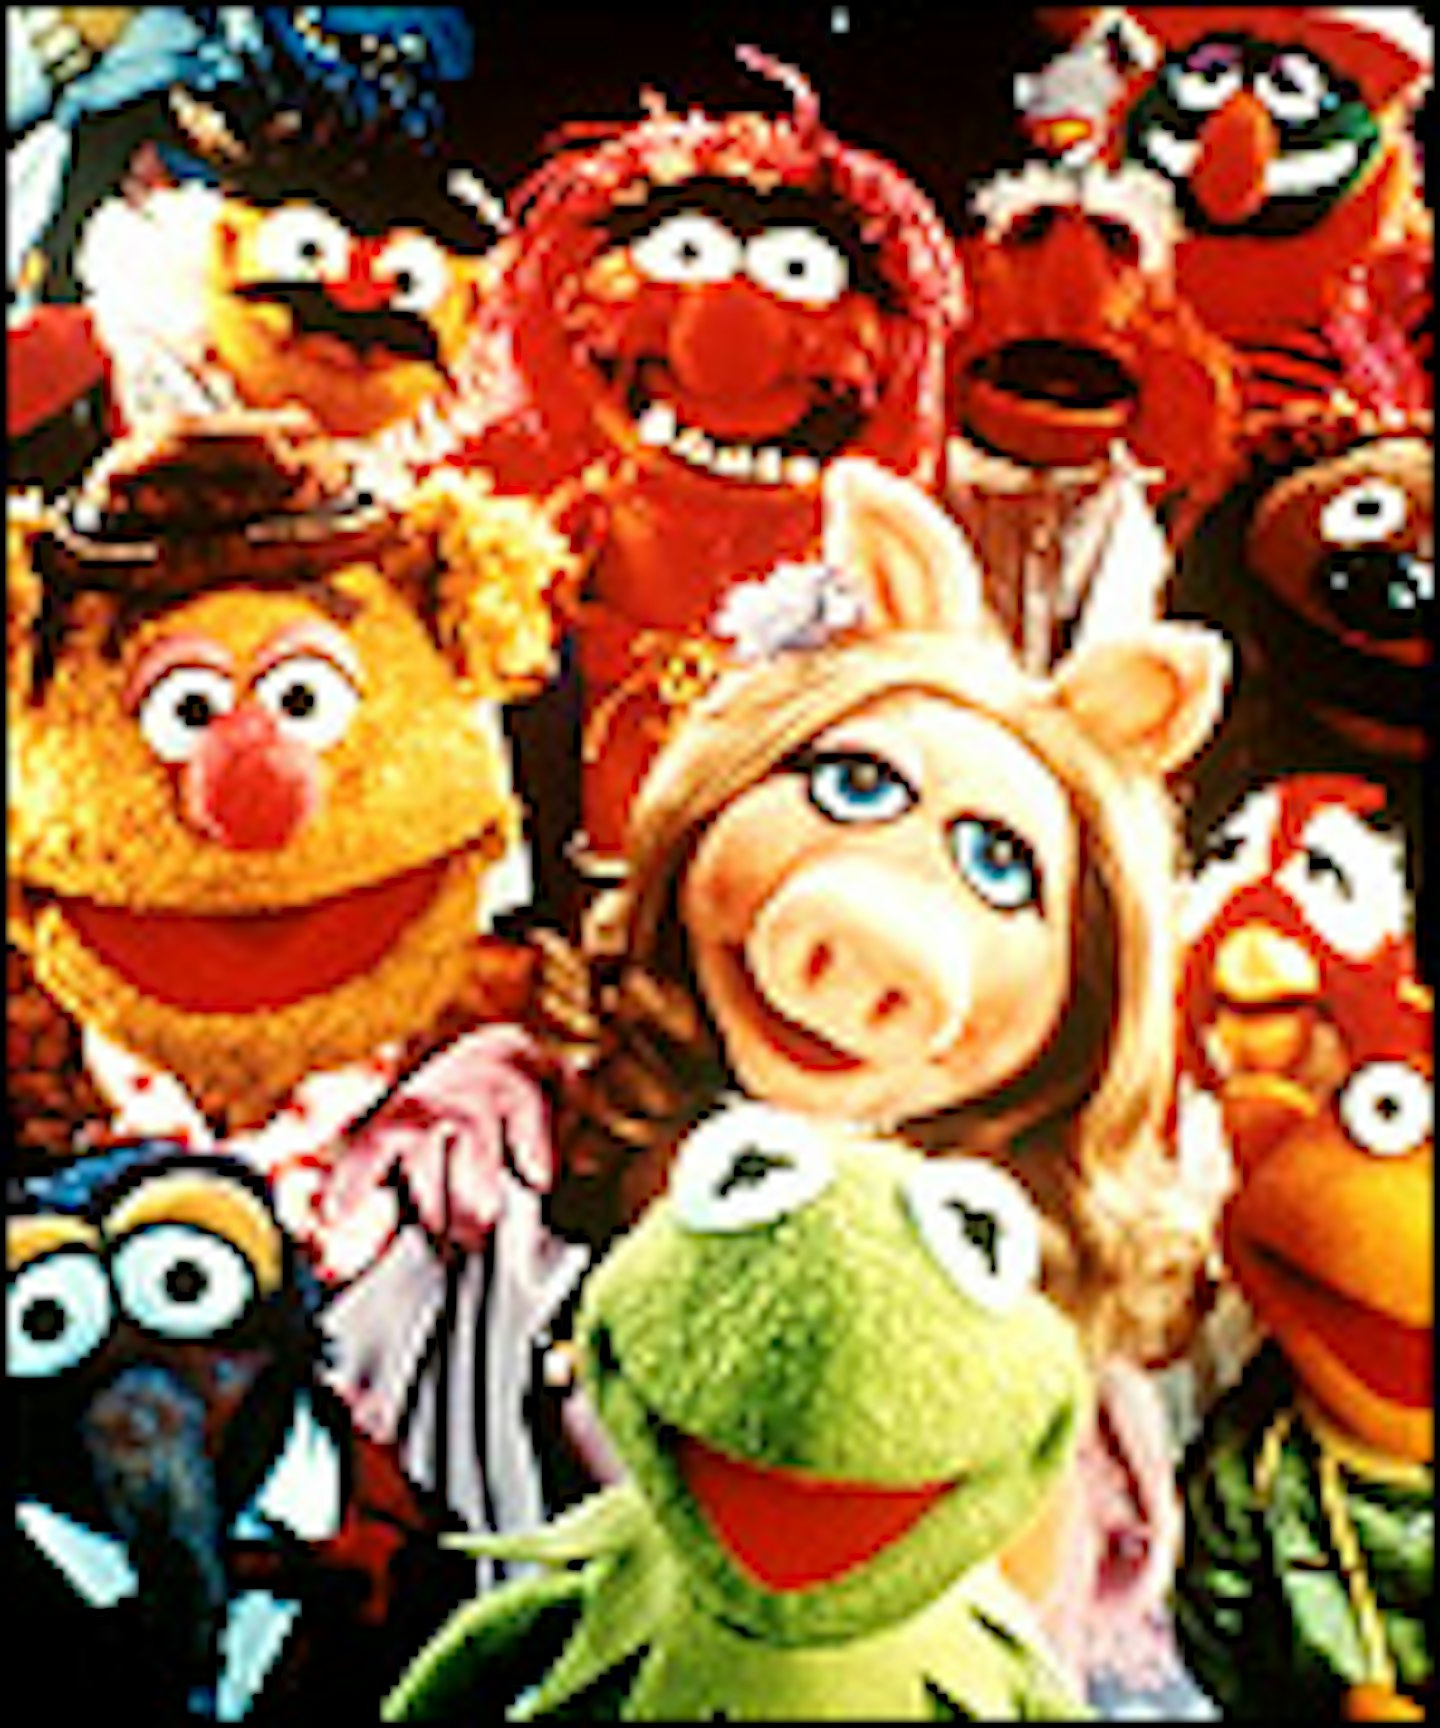 Exclusive: More Muppet Movie Details